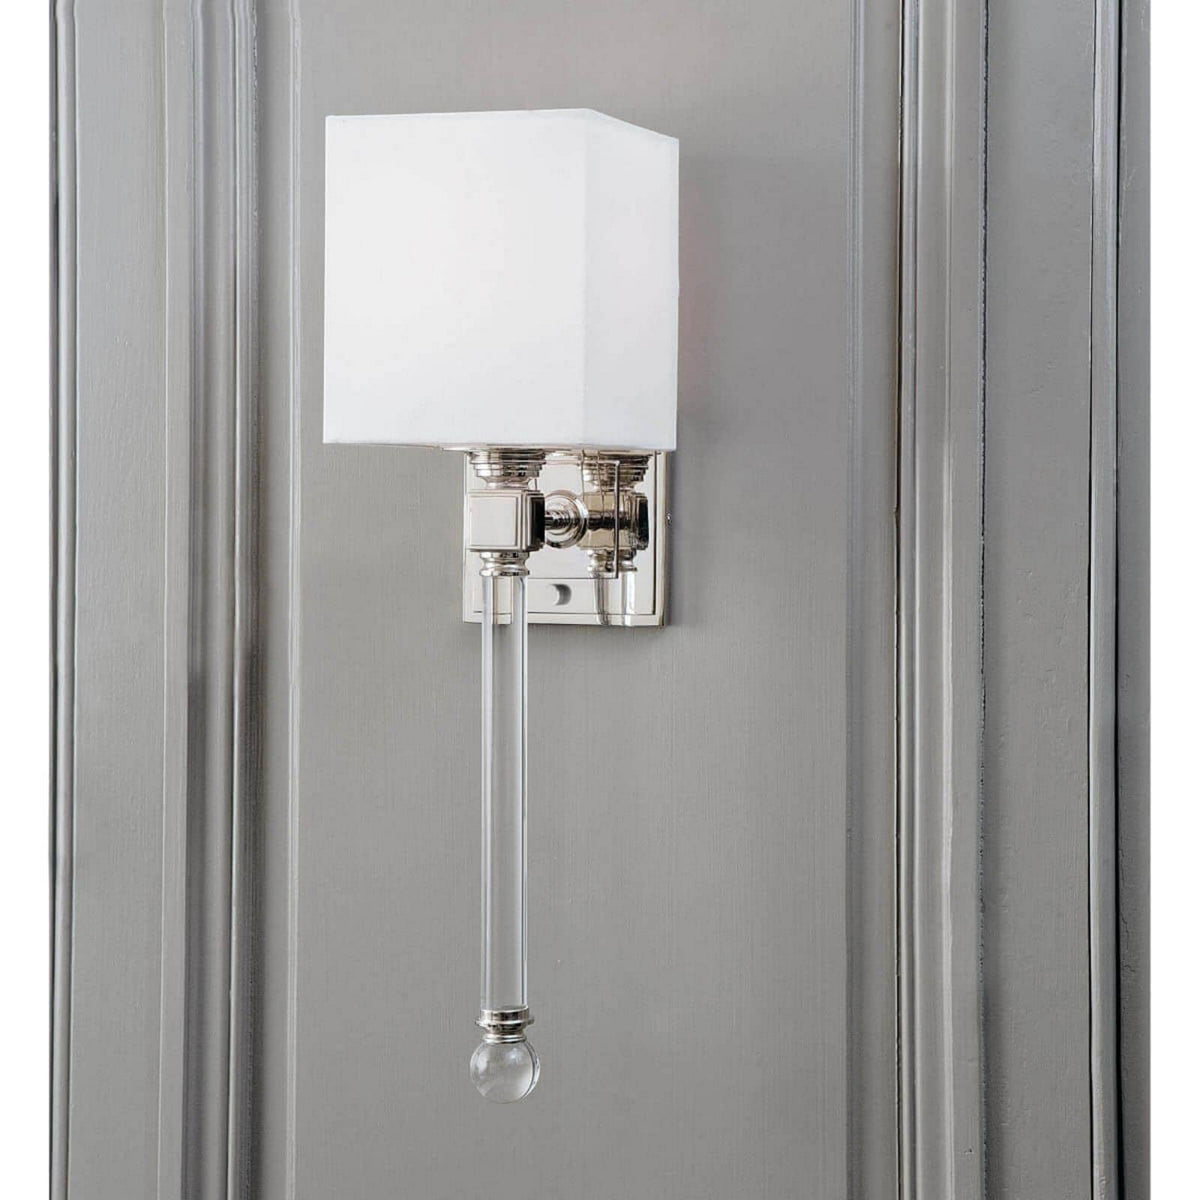 Regina Andrew - 15-1010PN - One Light Wall Sconce - Crystal - Polished Nickel